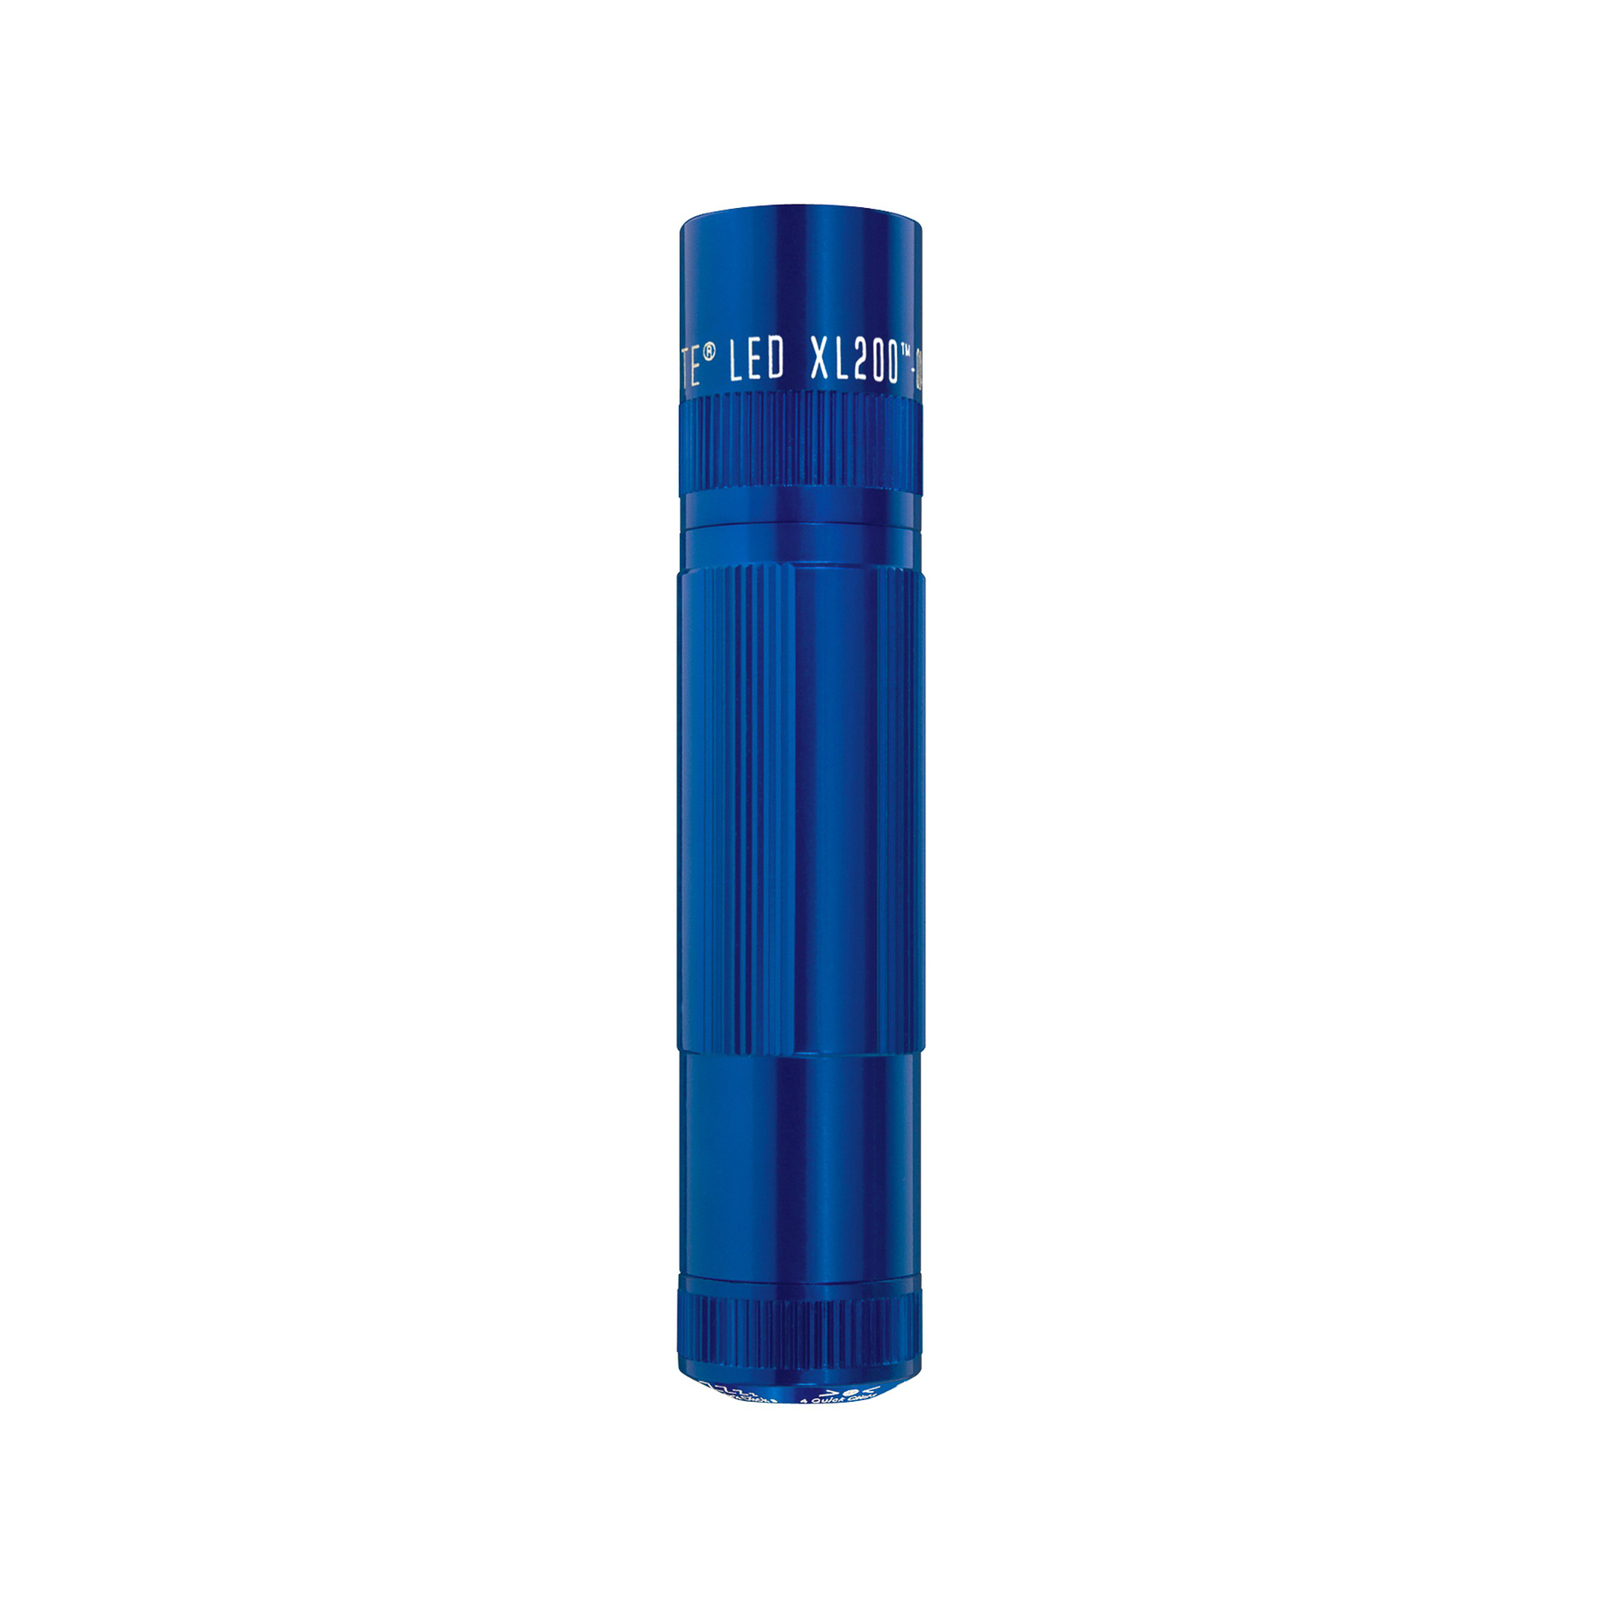 Maglite LED torch XL200, 3-Cell AAA, blue